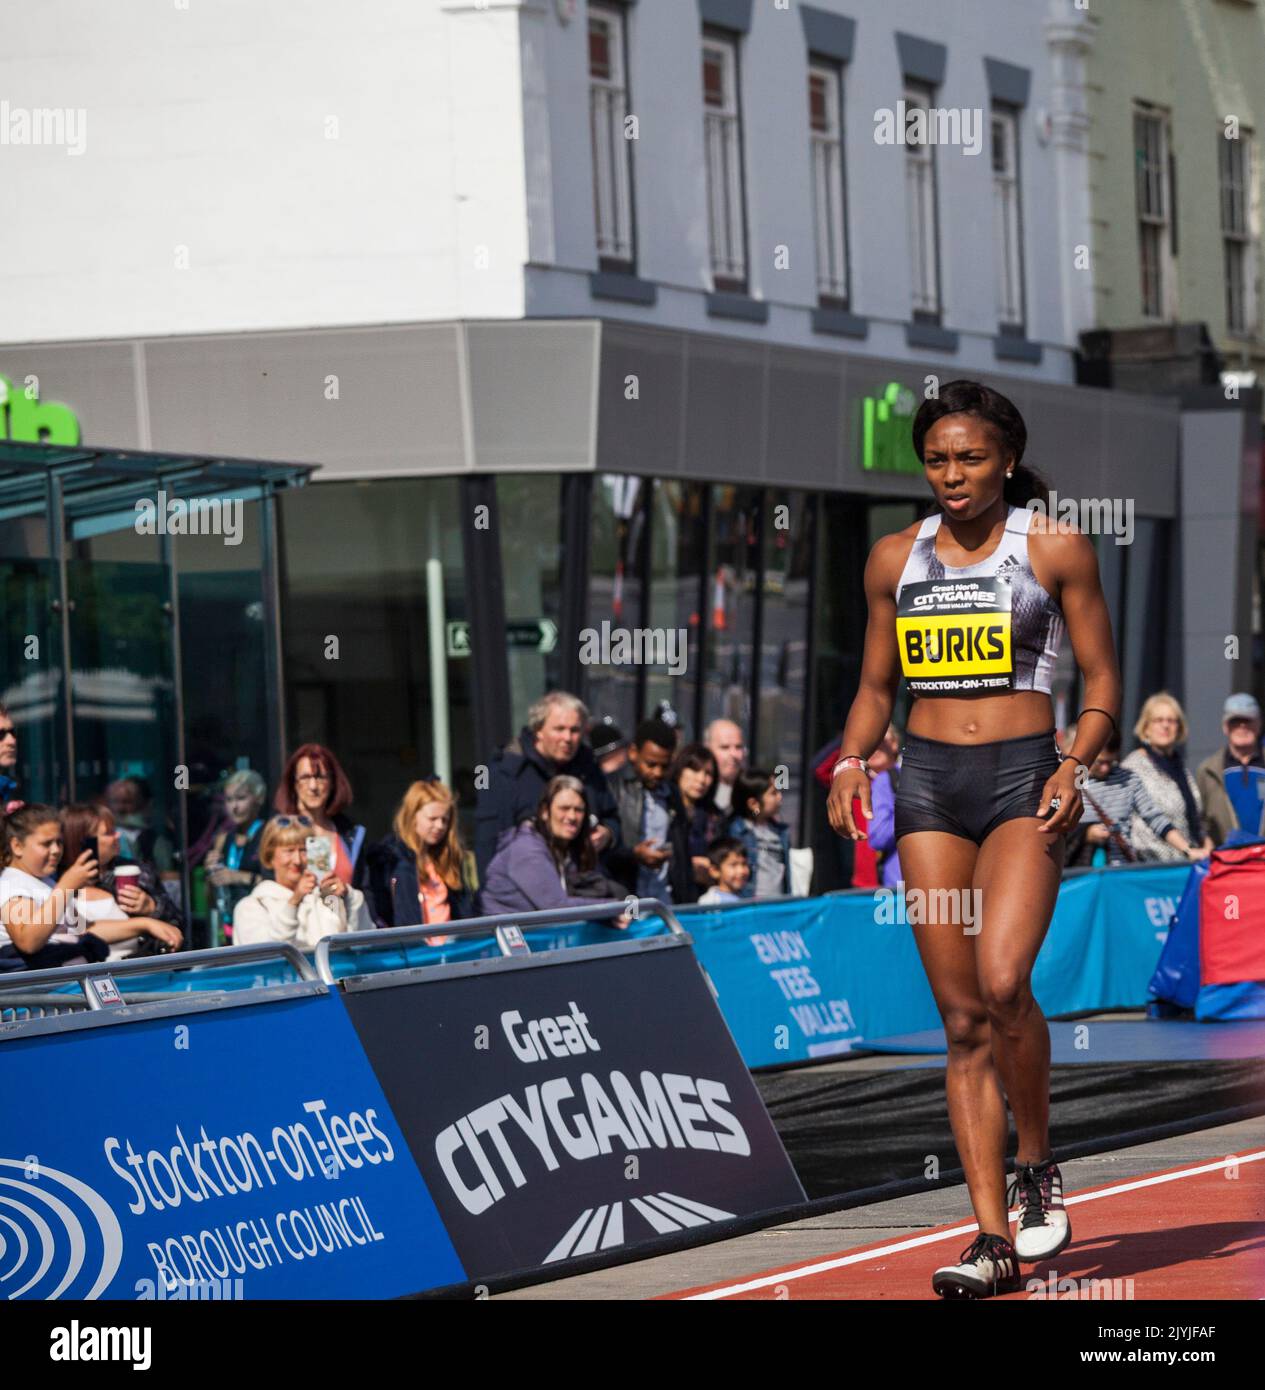 A female long jumper,Quanesha Burks, prepares for her jump in the Great North City Games were held in the High Street ,Stockton on Tees,England,UK Stock Photo